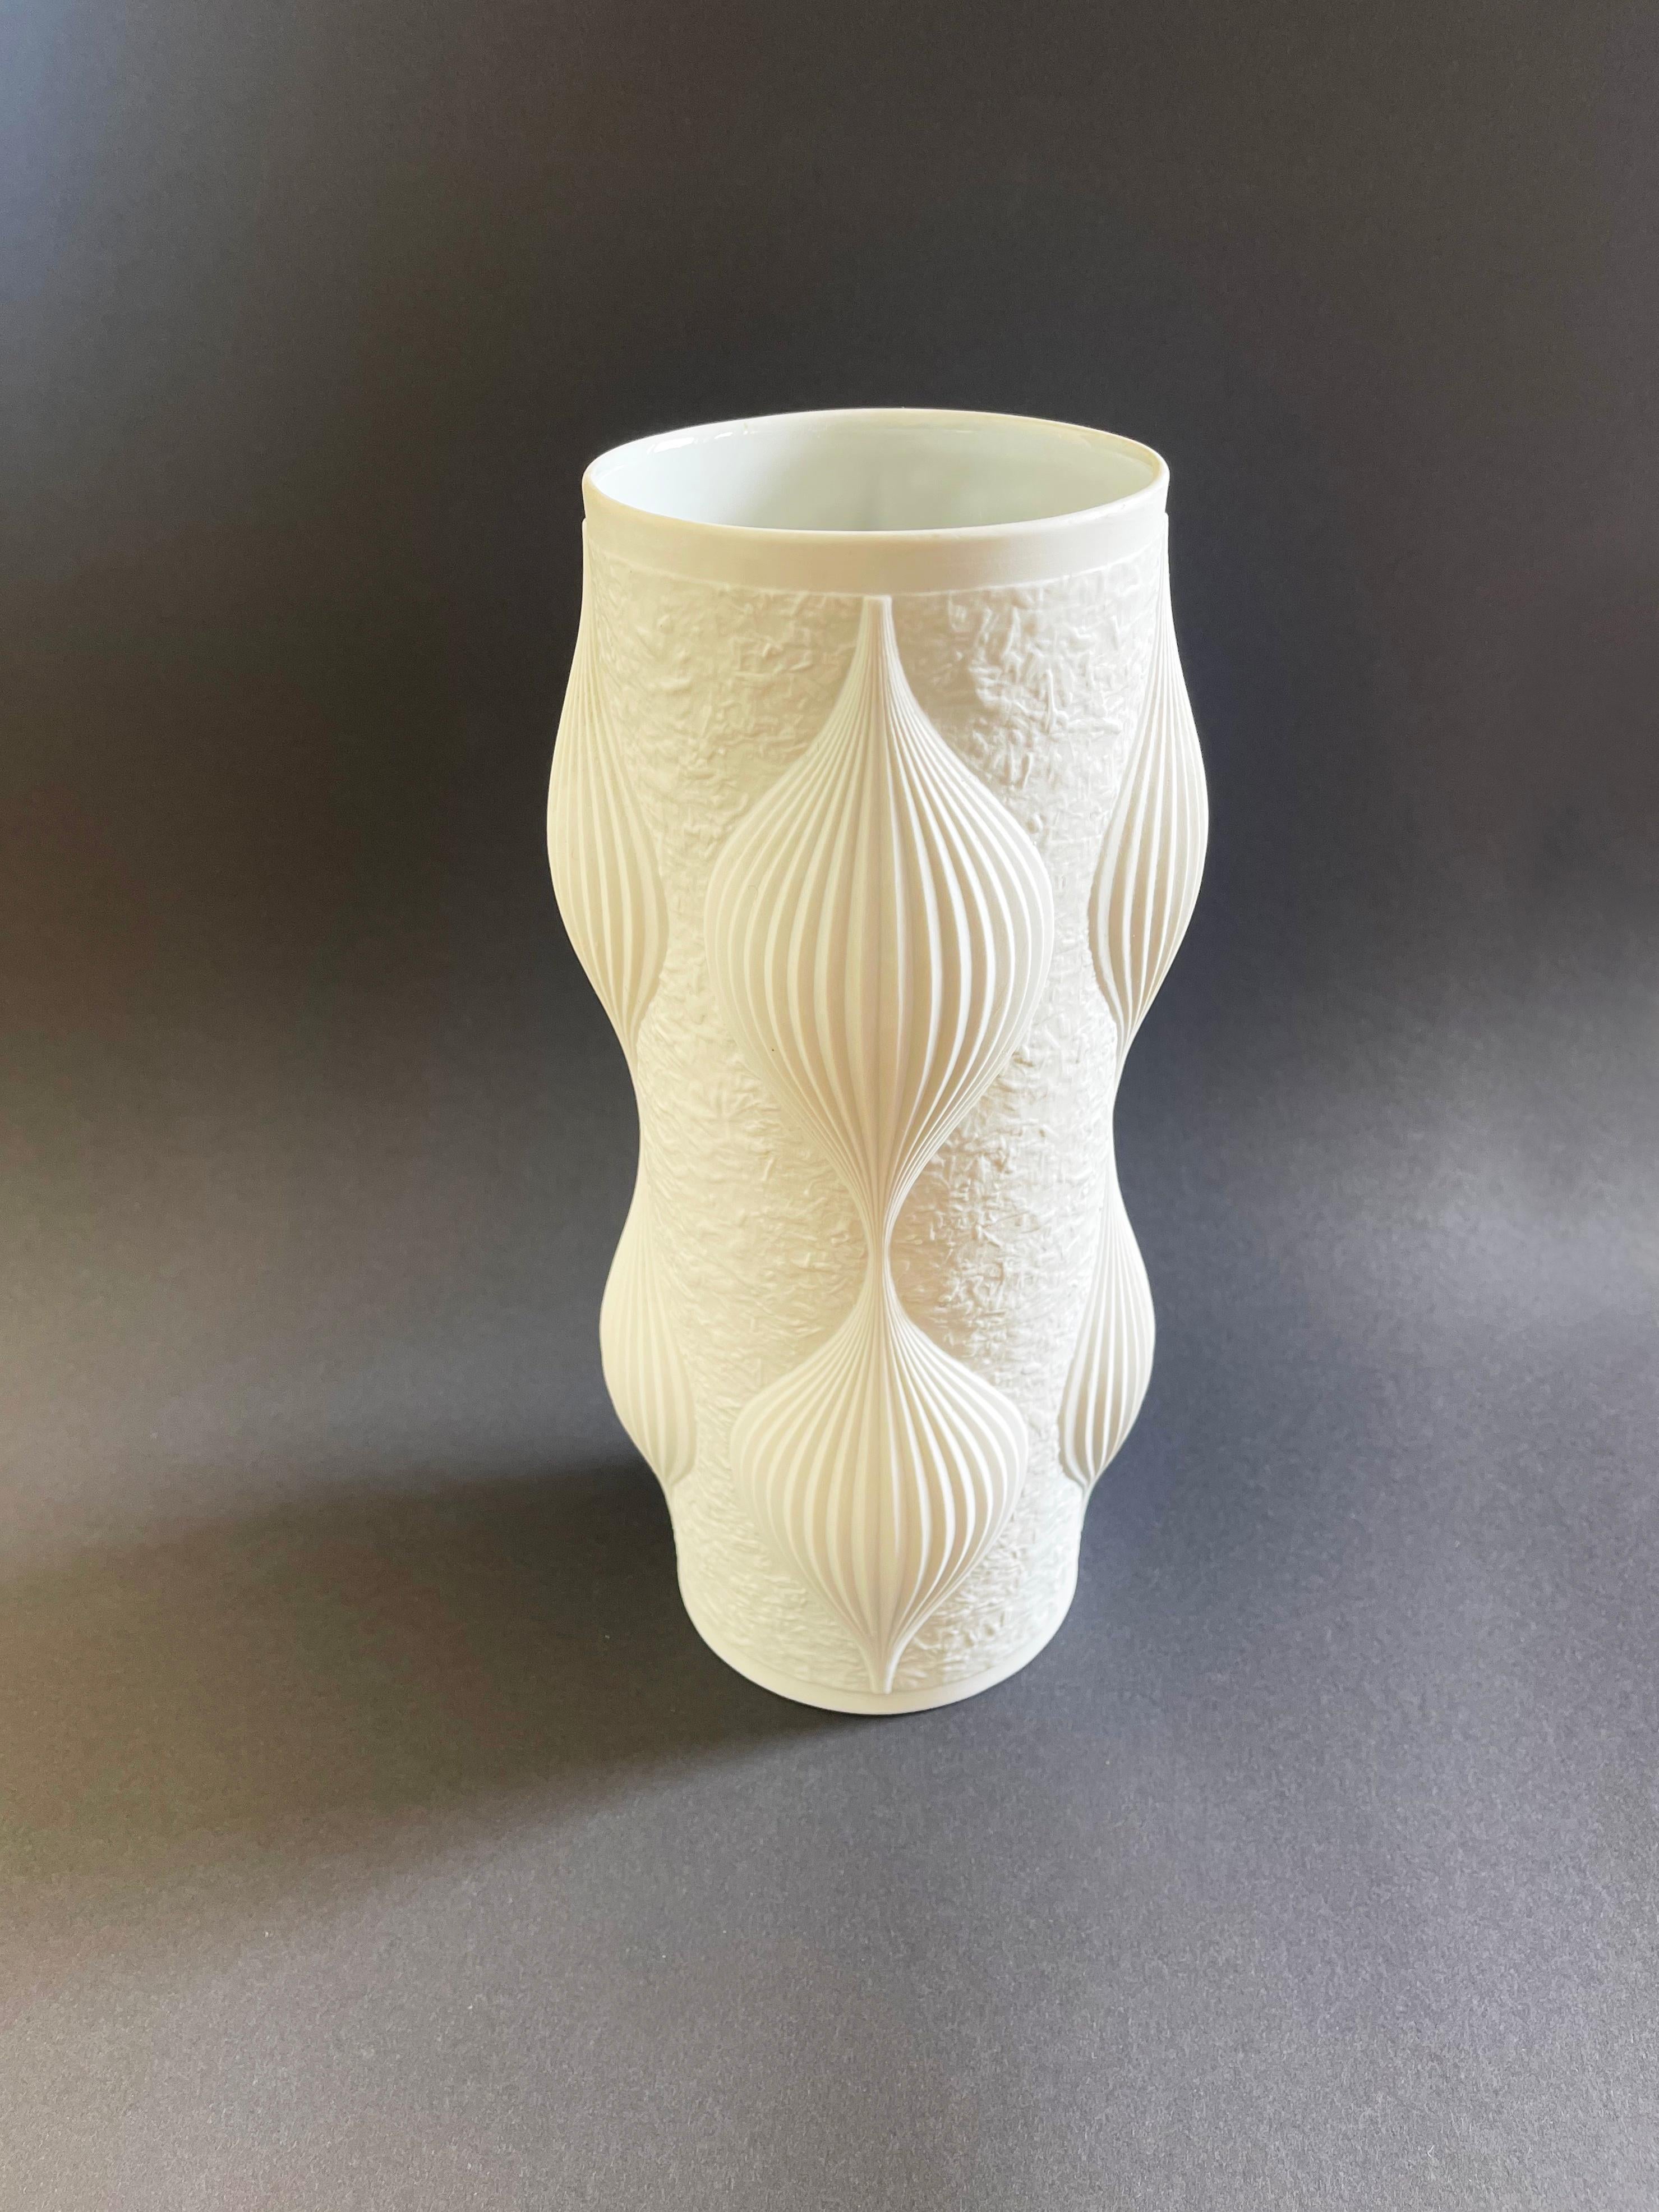 An amazing bisque porcelain midcentury studio art pottery vase, op-art at it's peak, made in Germany, by Heinrich Fuchs for Hutschenreuther, circa 1960s. Vase is in very good condition with no flaws.